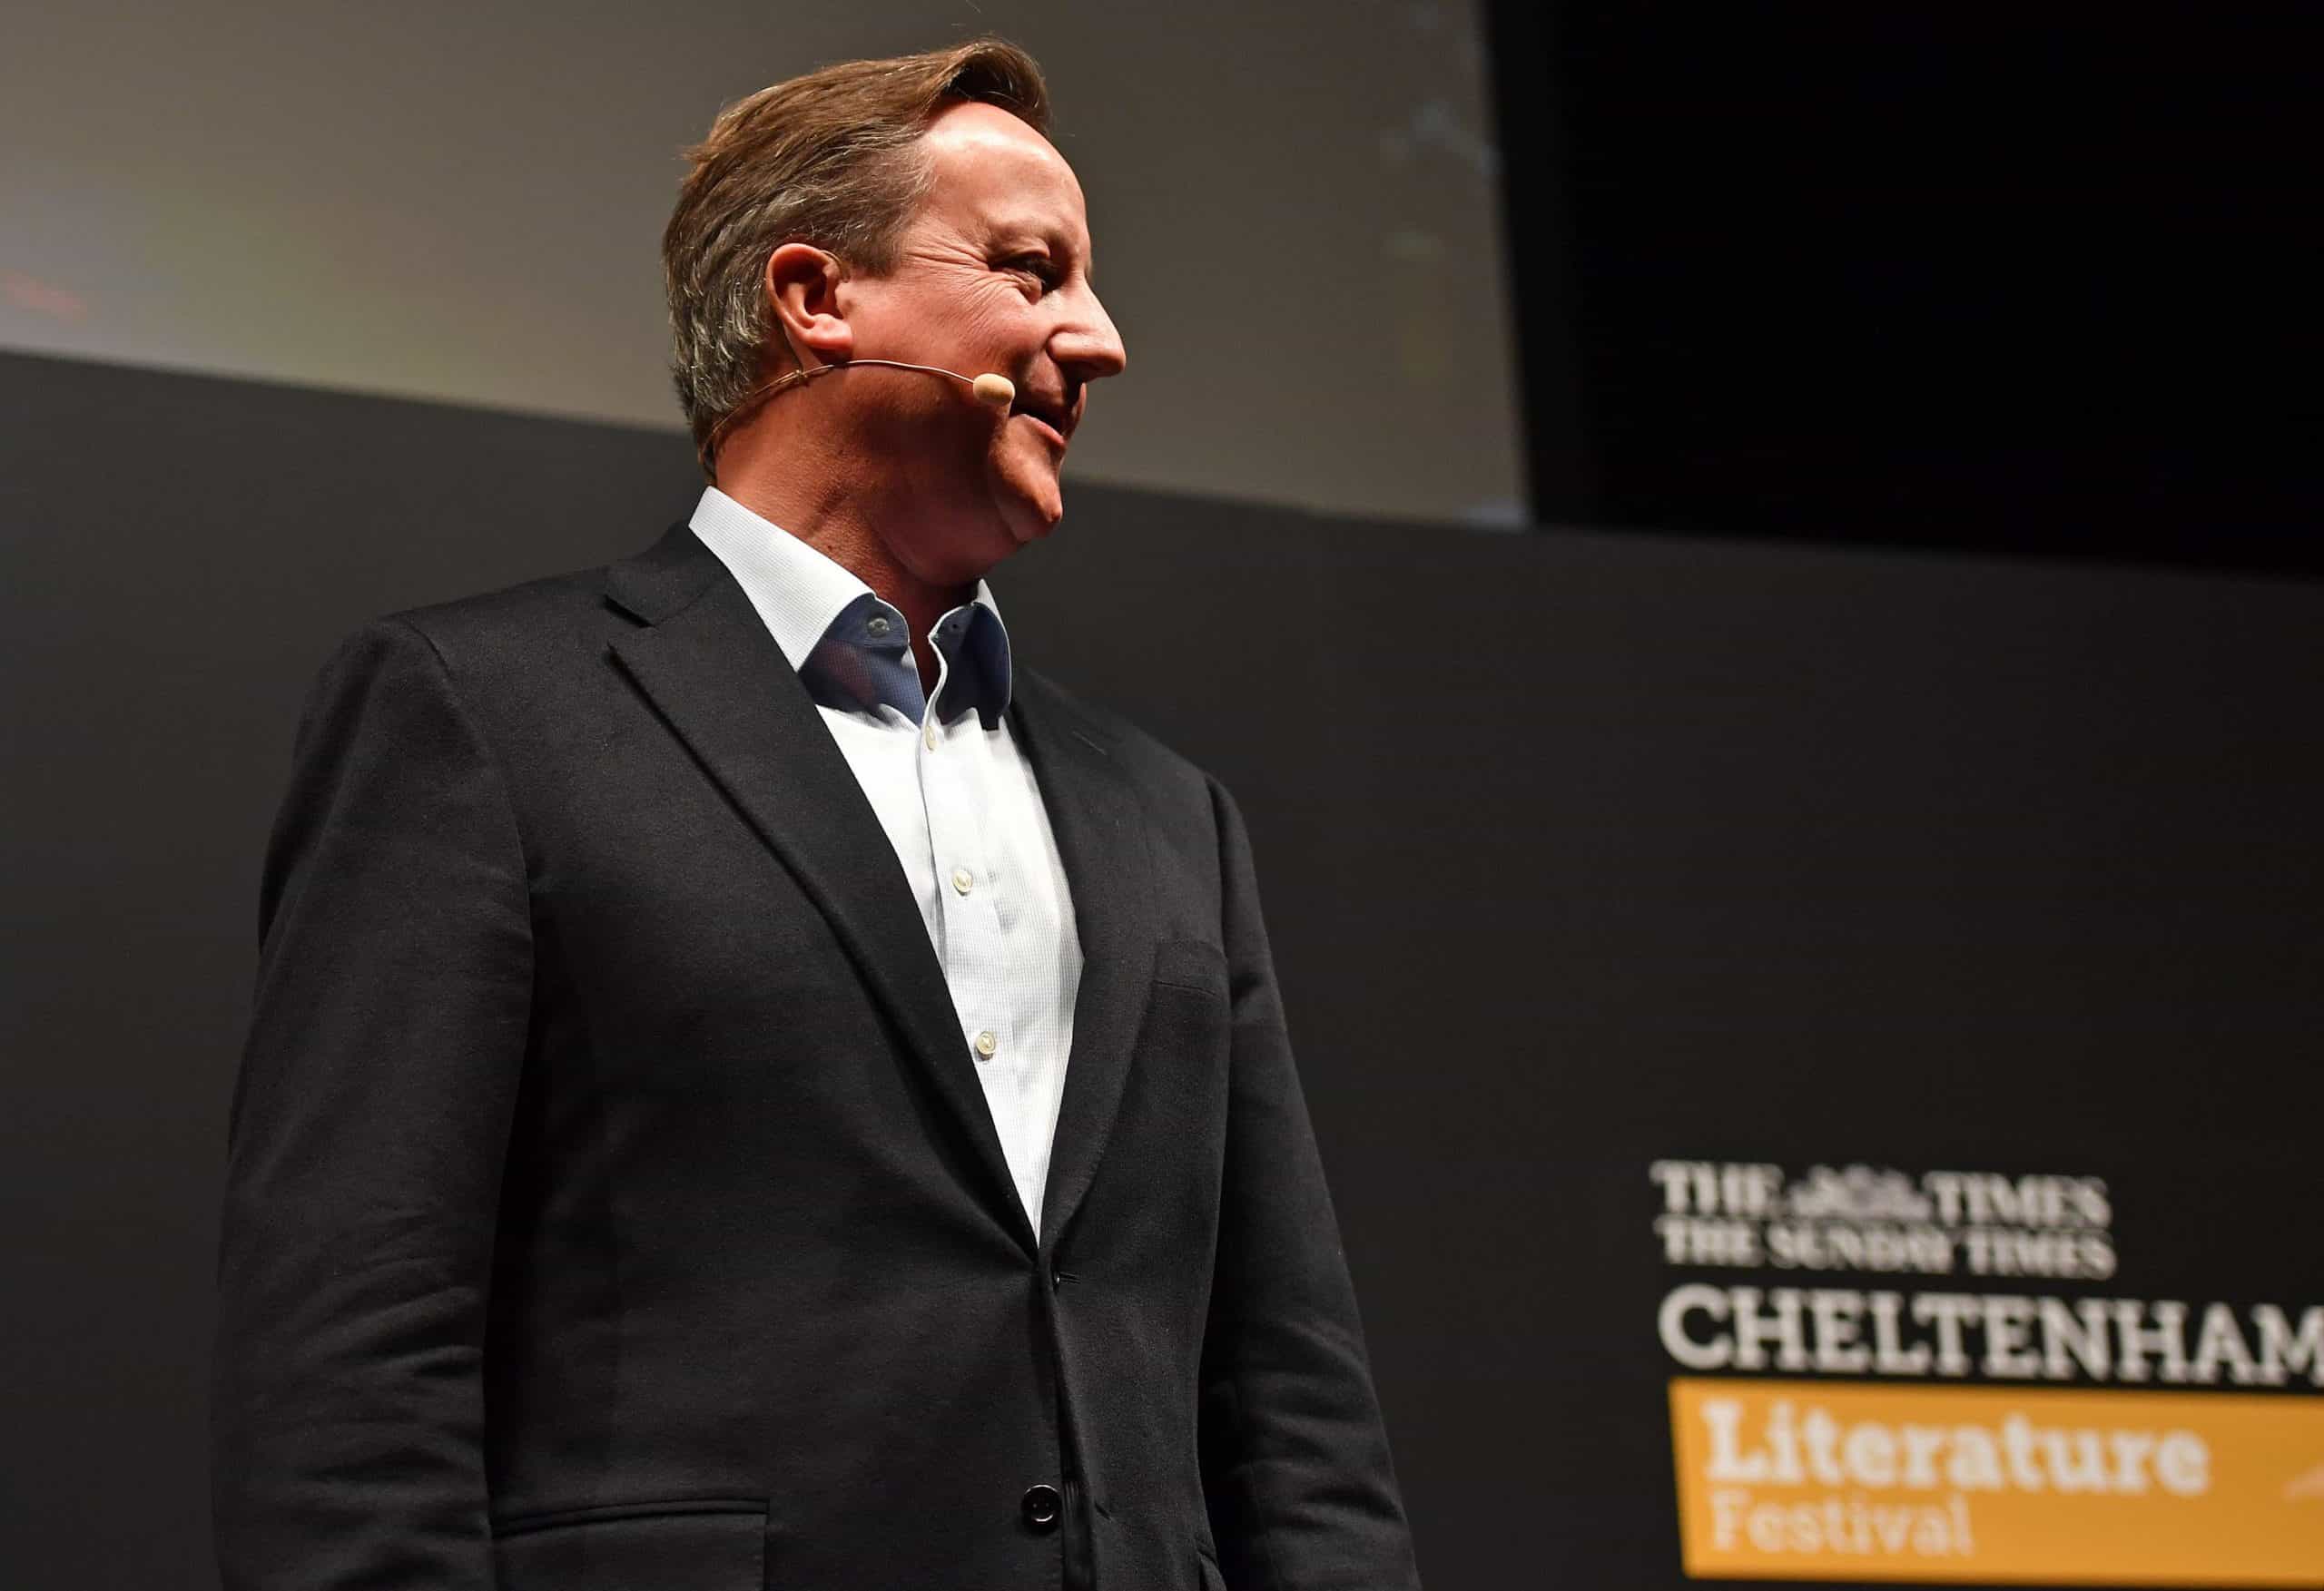 Cameron ‘camped under the stars’ with Saudi crown prince and Greensill